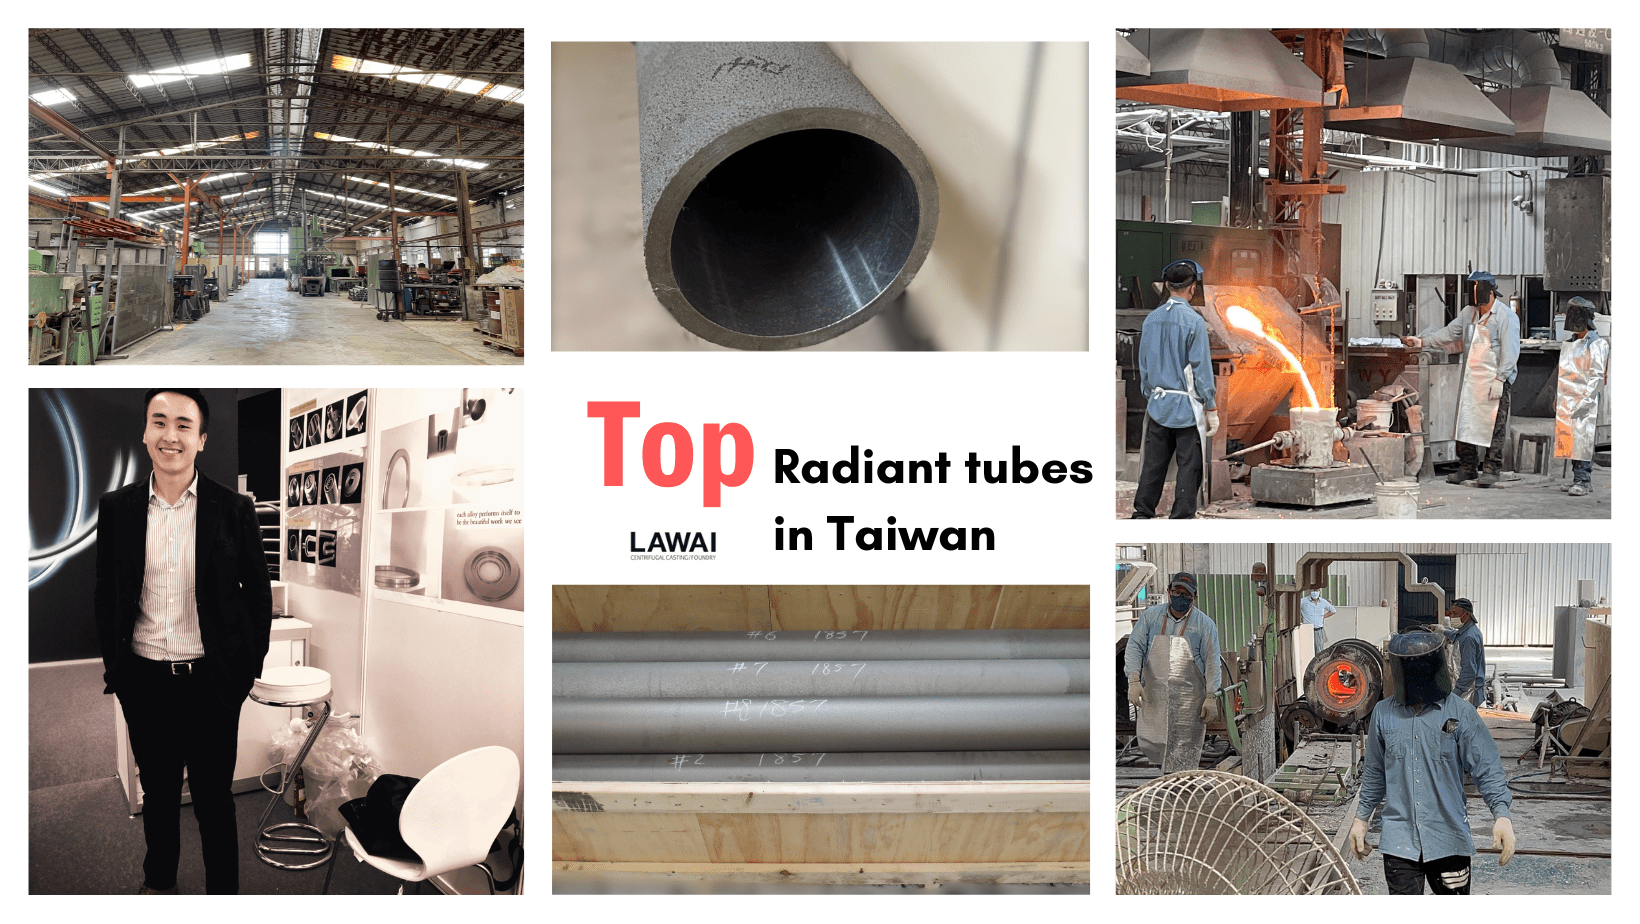 LAWAI INDUSTRIAL CORPORATION produces the custom radiant tubes for electrically furnaces by centrifugal casting technique in Taiwan